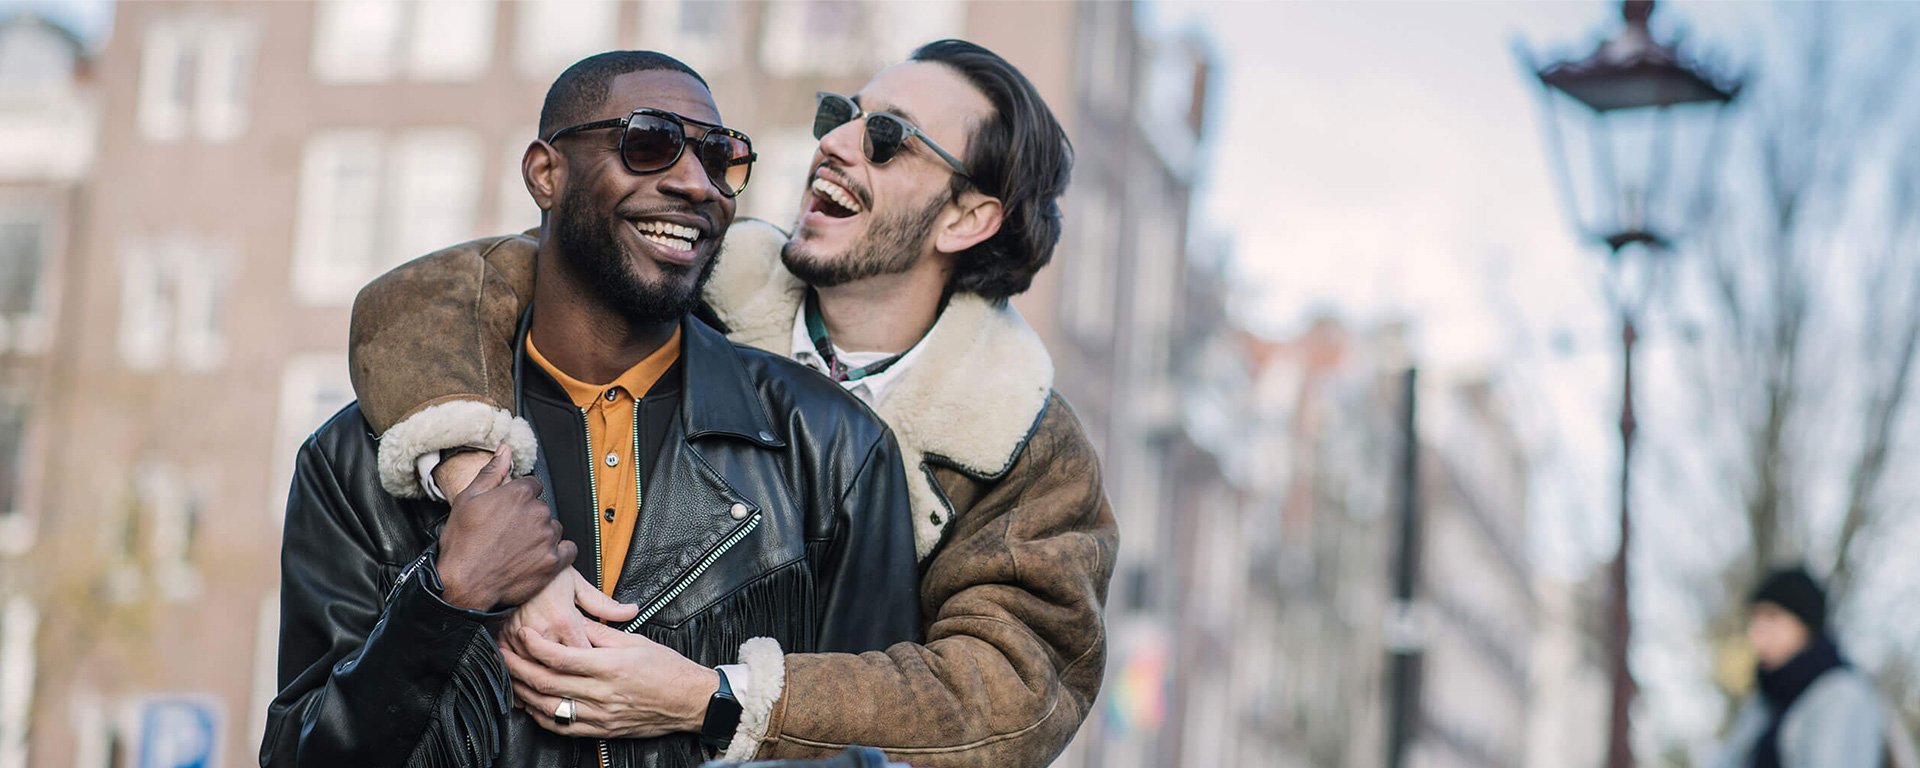 Same-sex couple embraced on street in late autumn or early winter in Amsterdam. Caucasian and African ethnicity, brown hair, sunglasses, wearing leather jackets.